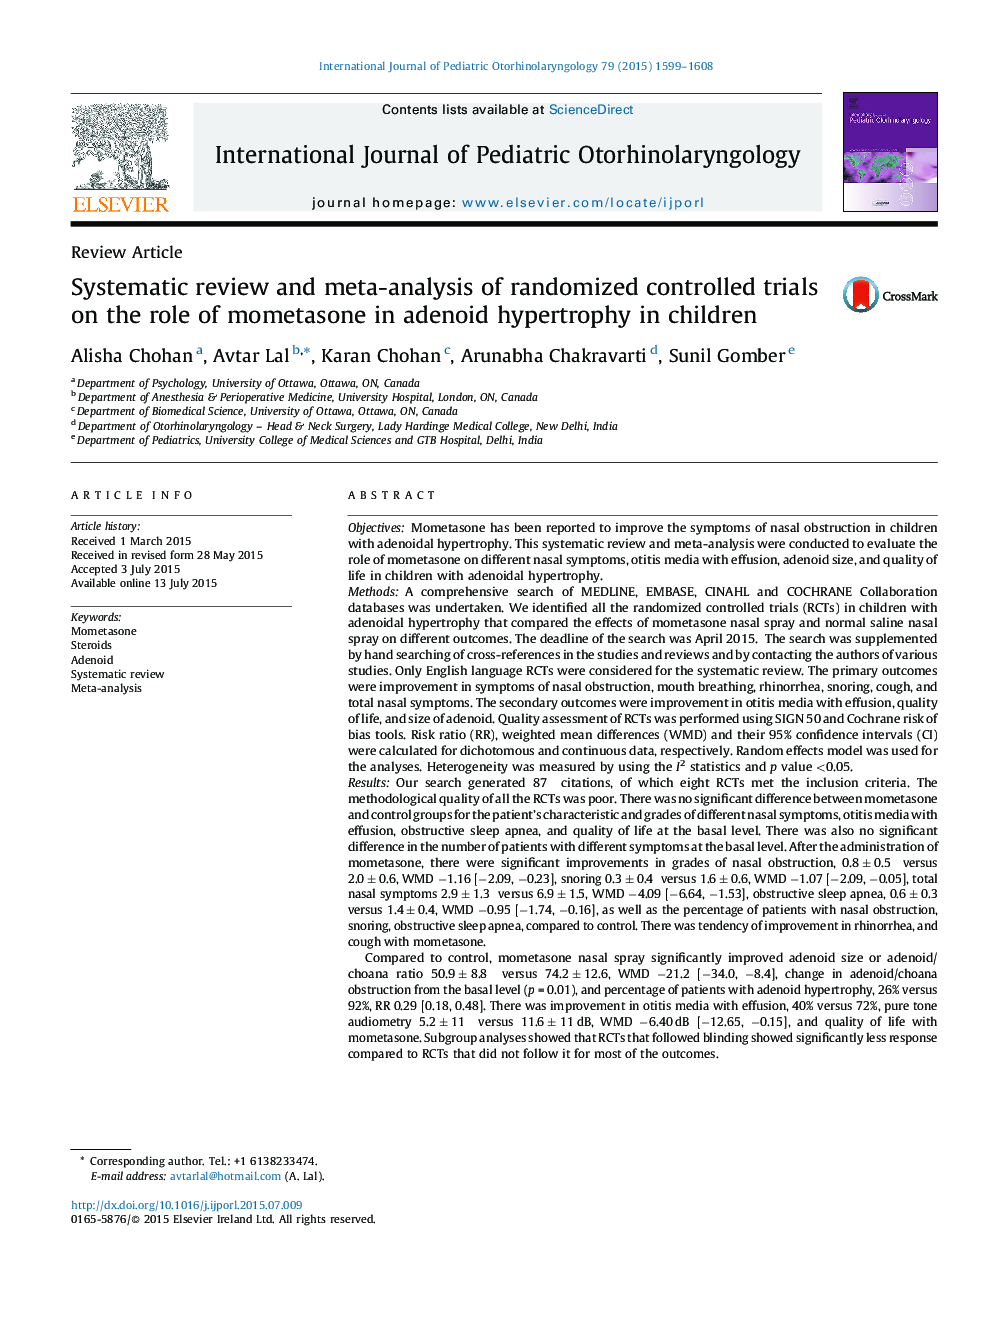 Systematic review and meta-analysis of randomized controlled trials on the role of mometasone in adenoid hypertrophy in children